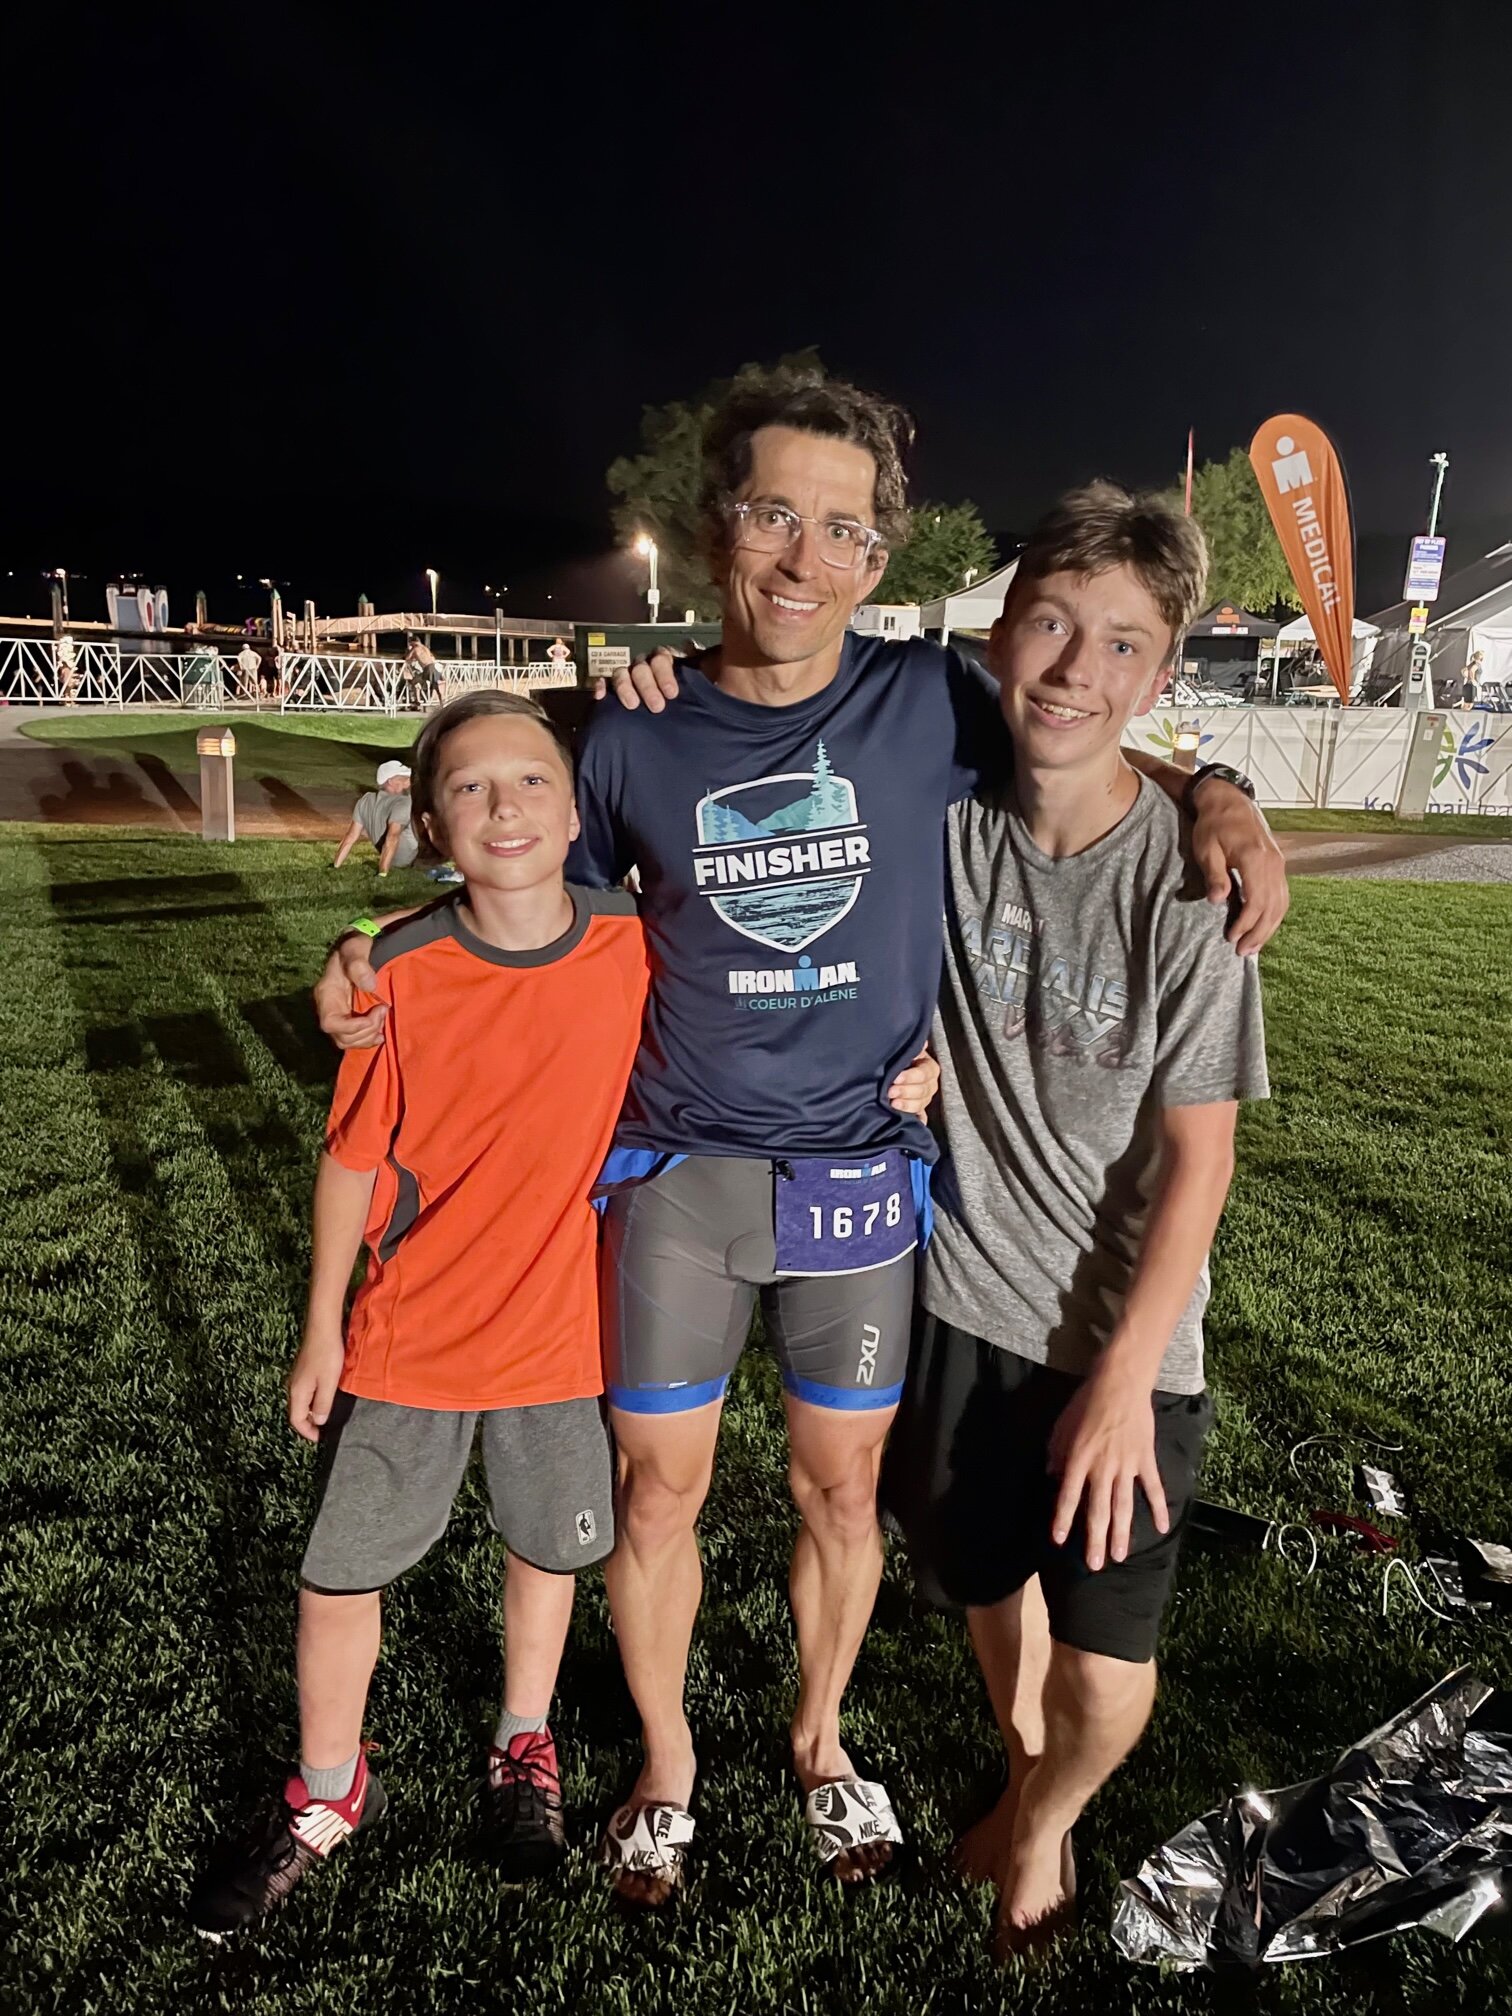 Adam Stakeman at the finish line of Ironman Coeur d’Alene 2021 with his sons.